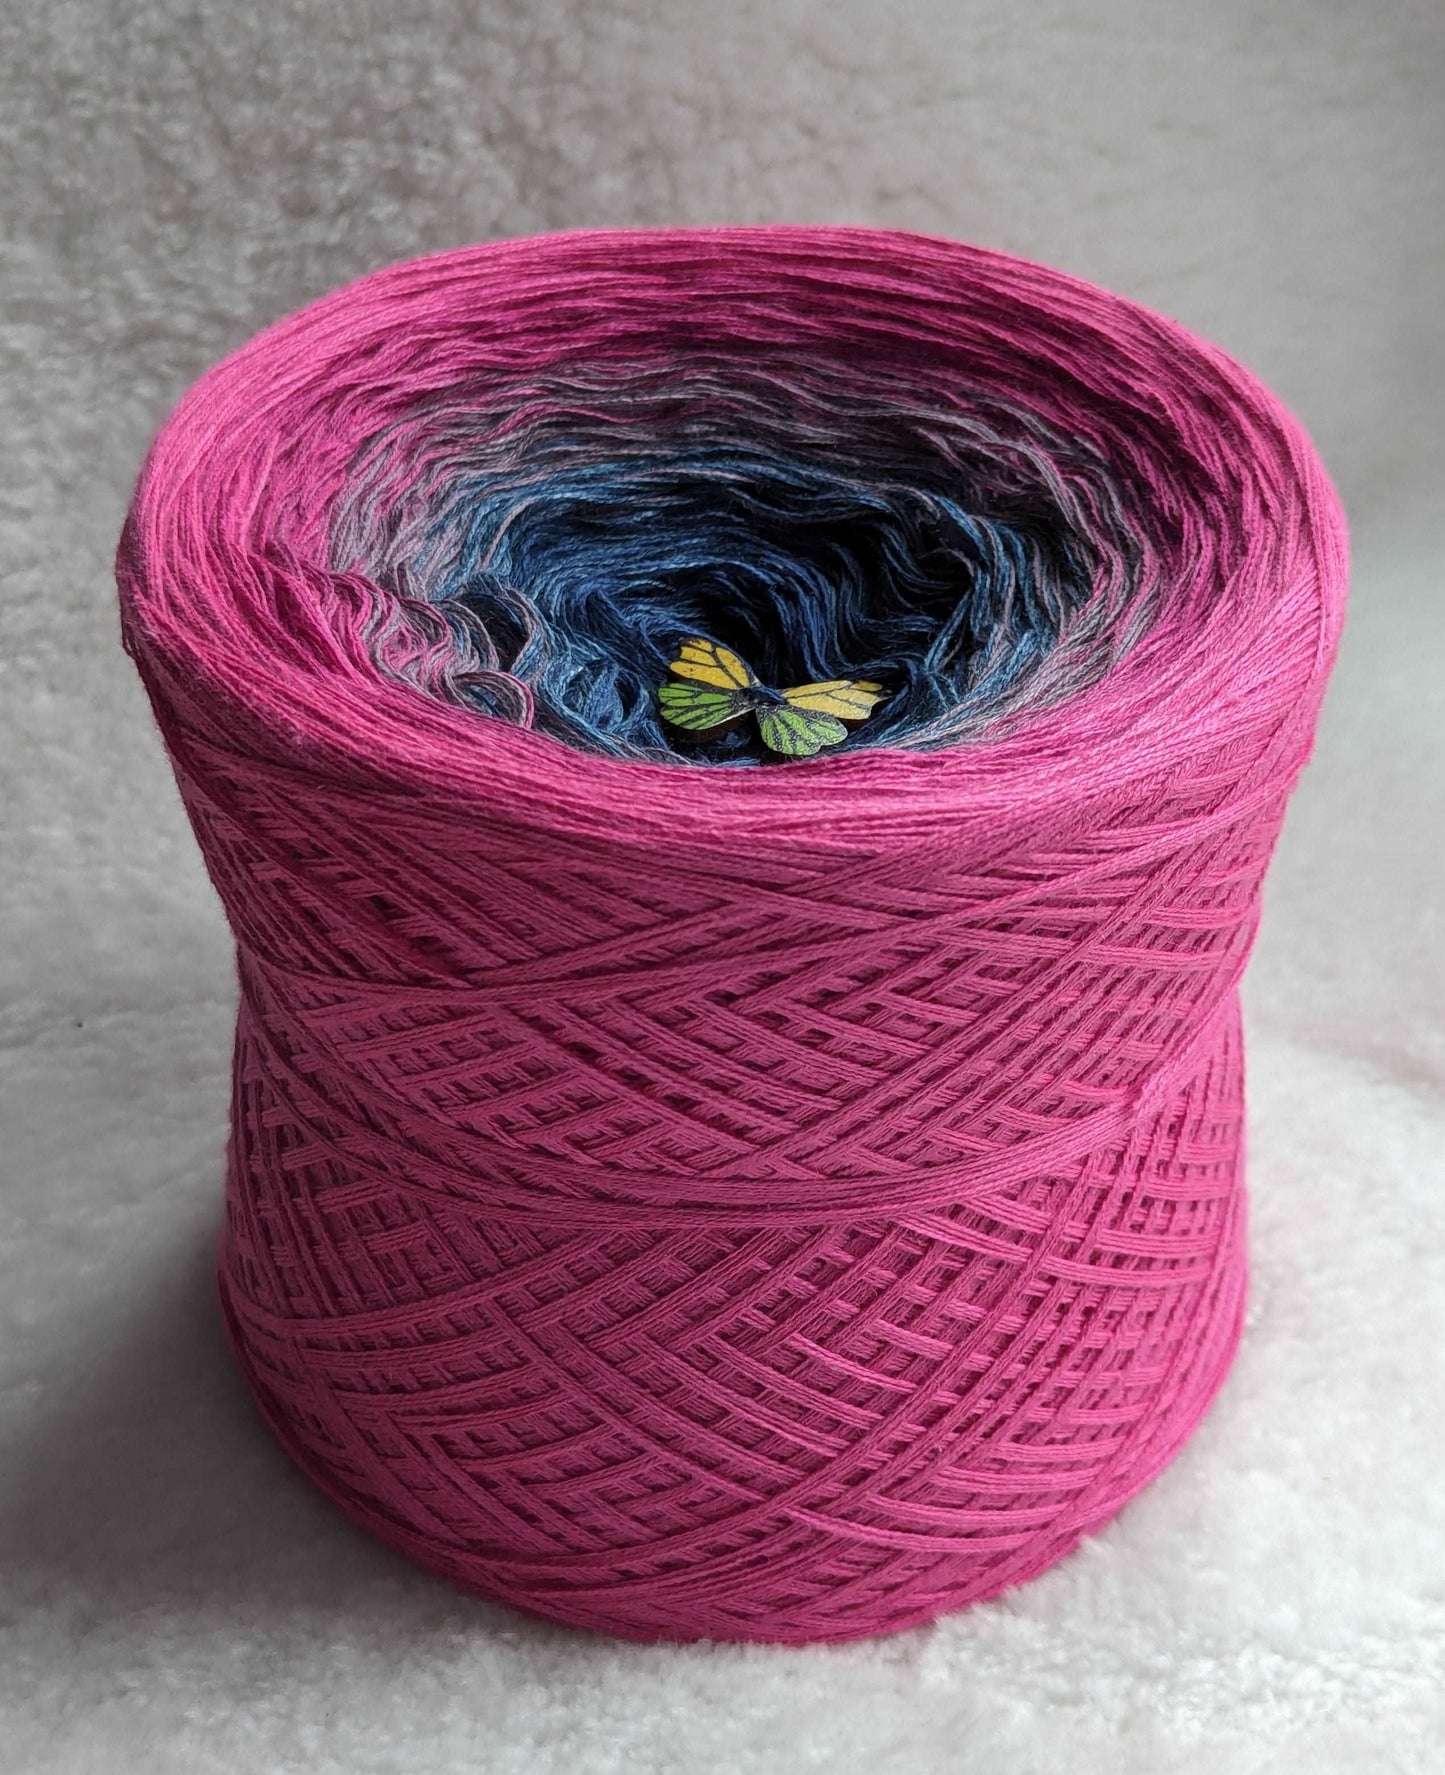 "Cosmos flowers" gradient ombre yarn cake